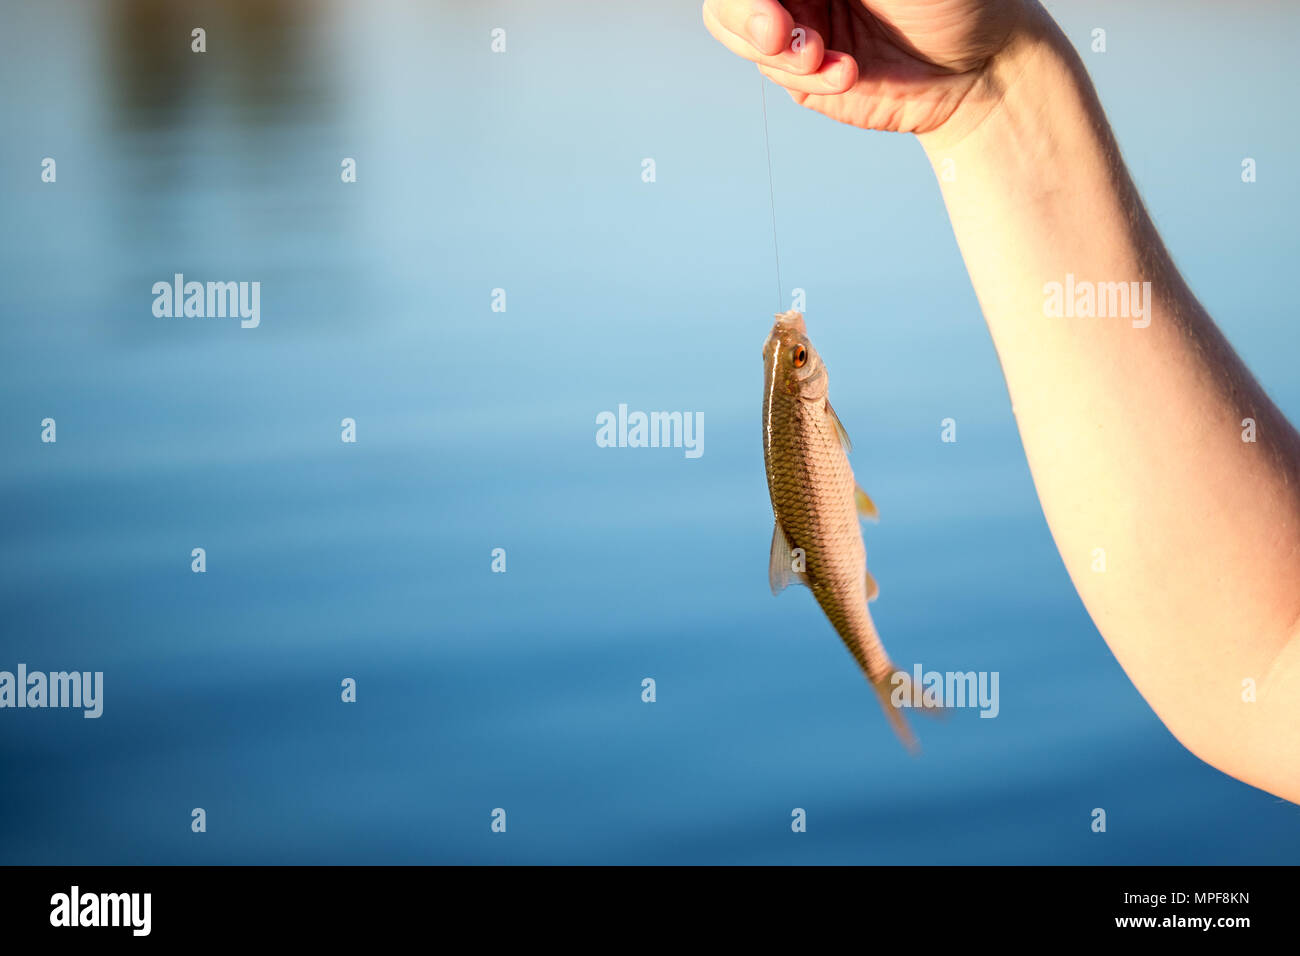 https://c8.alamy.com/comp/MPF8KN/close-up-small-redeye-fish-on-a-hook-in-hand-against-blue-lake-or-river-water-newcomer-fishing-background-copyspace-MPF8KN.jpg